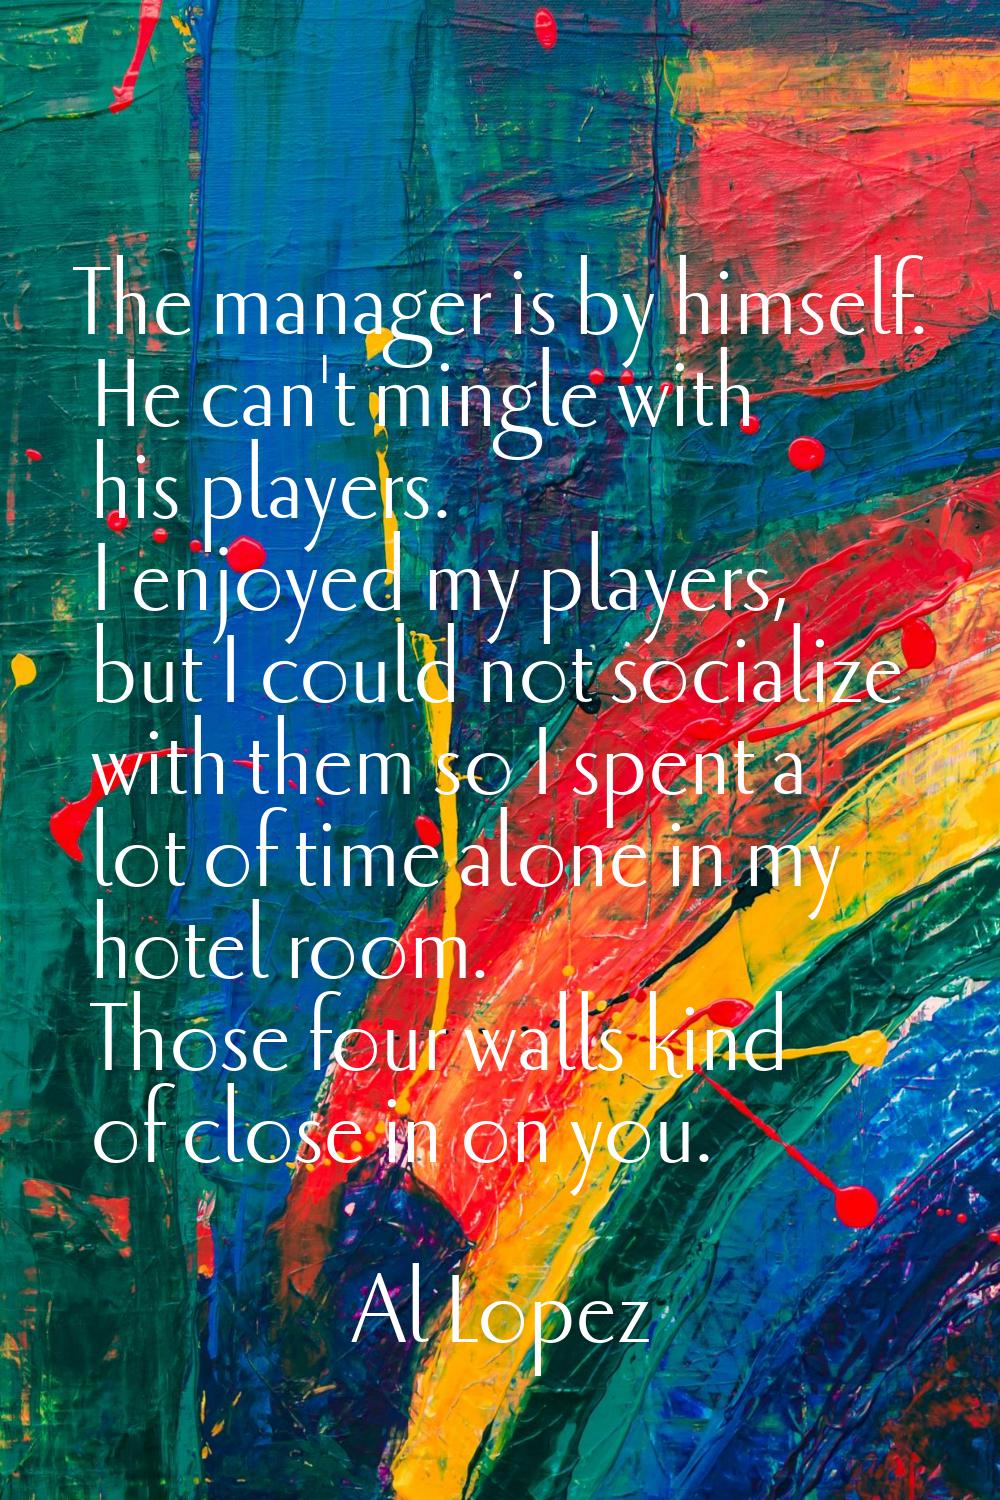 The manager is by himself. He can't mingle with his players. I enjoyed my players, but I could not 